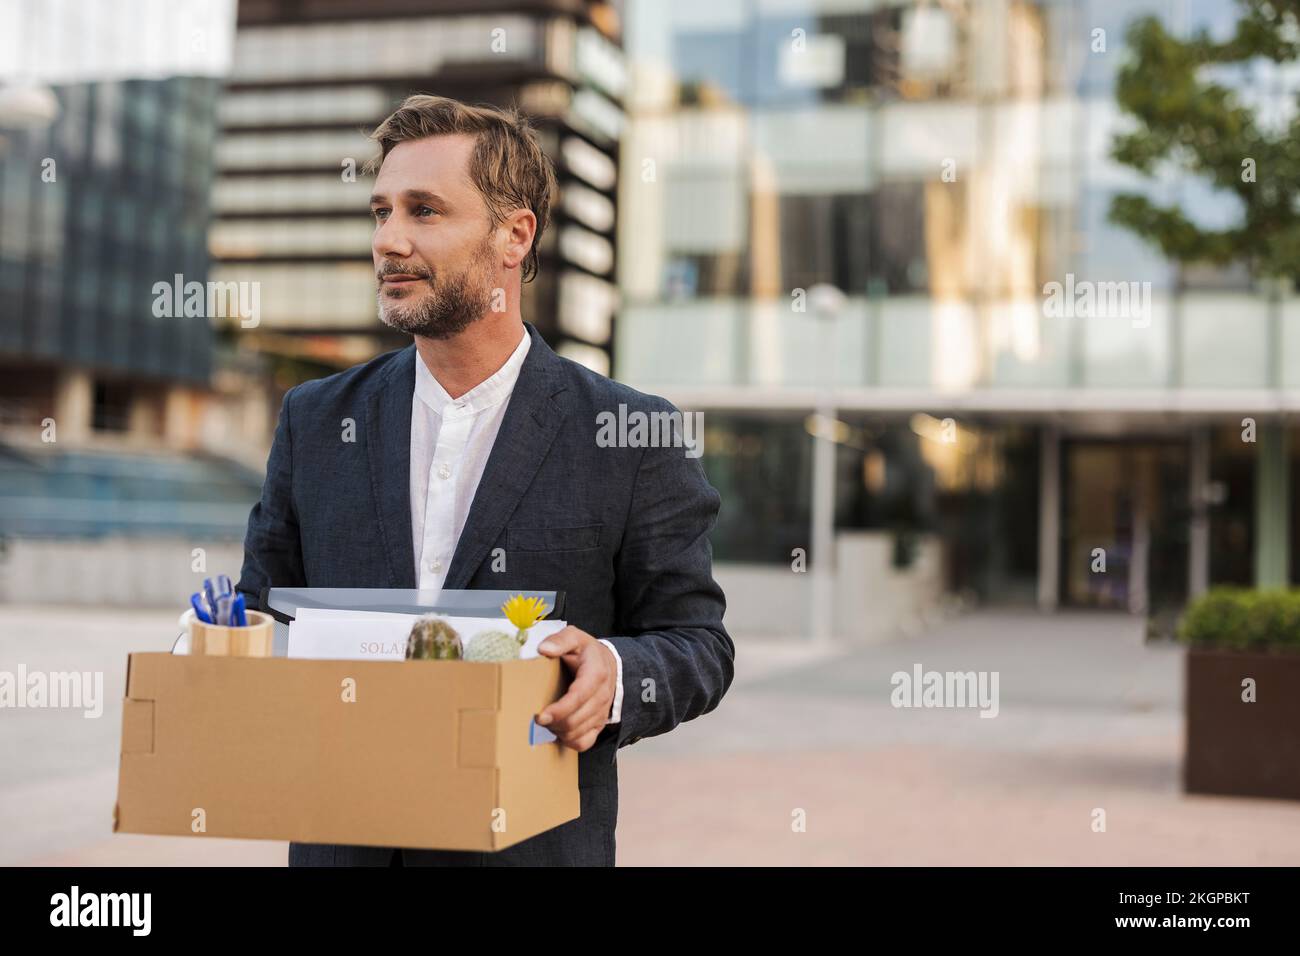 Businessman carrying cardboard box outside office building Stock Photo